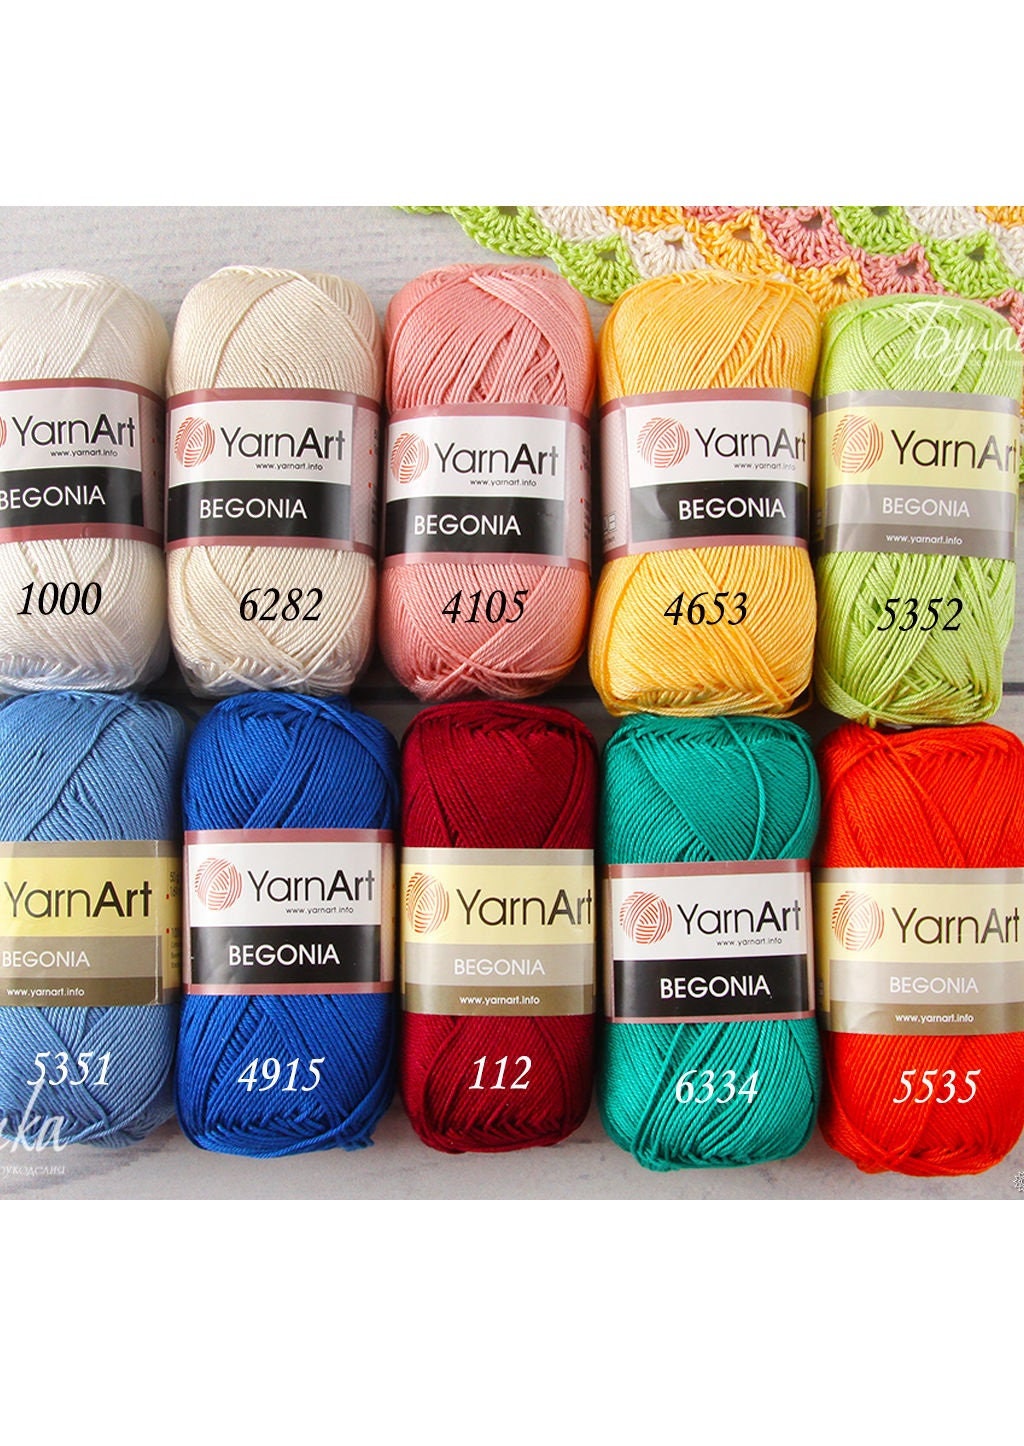 Free: NEW - I Love This Yarn! - Lime Ombre 100% Cotton - Crochet -   Auctions for Free Stuff